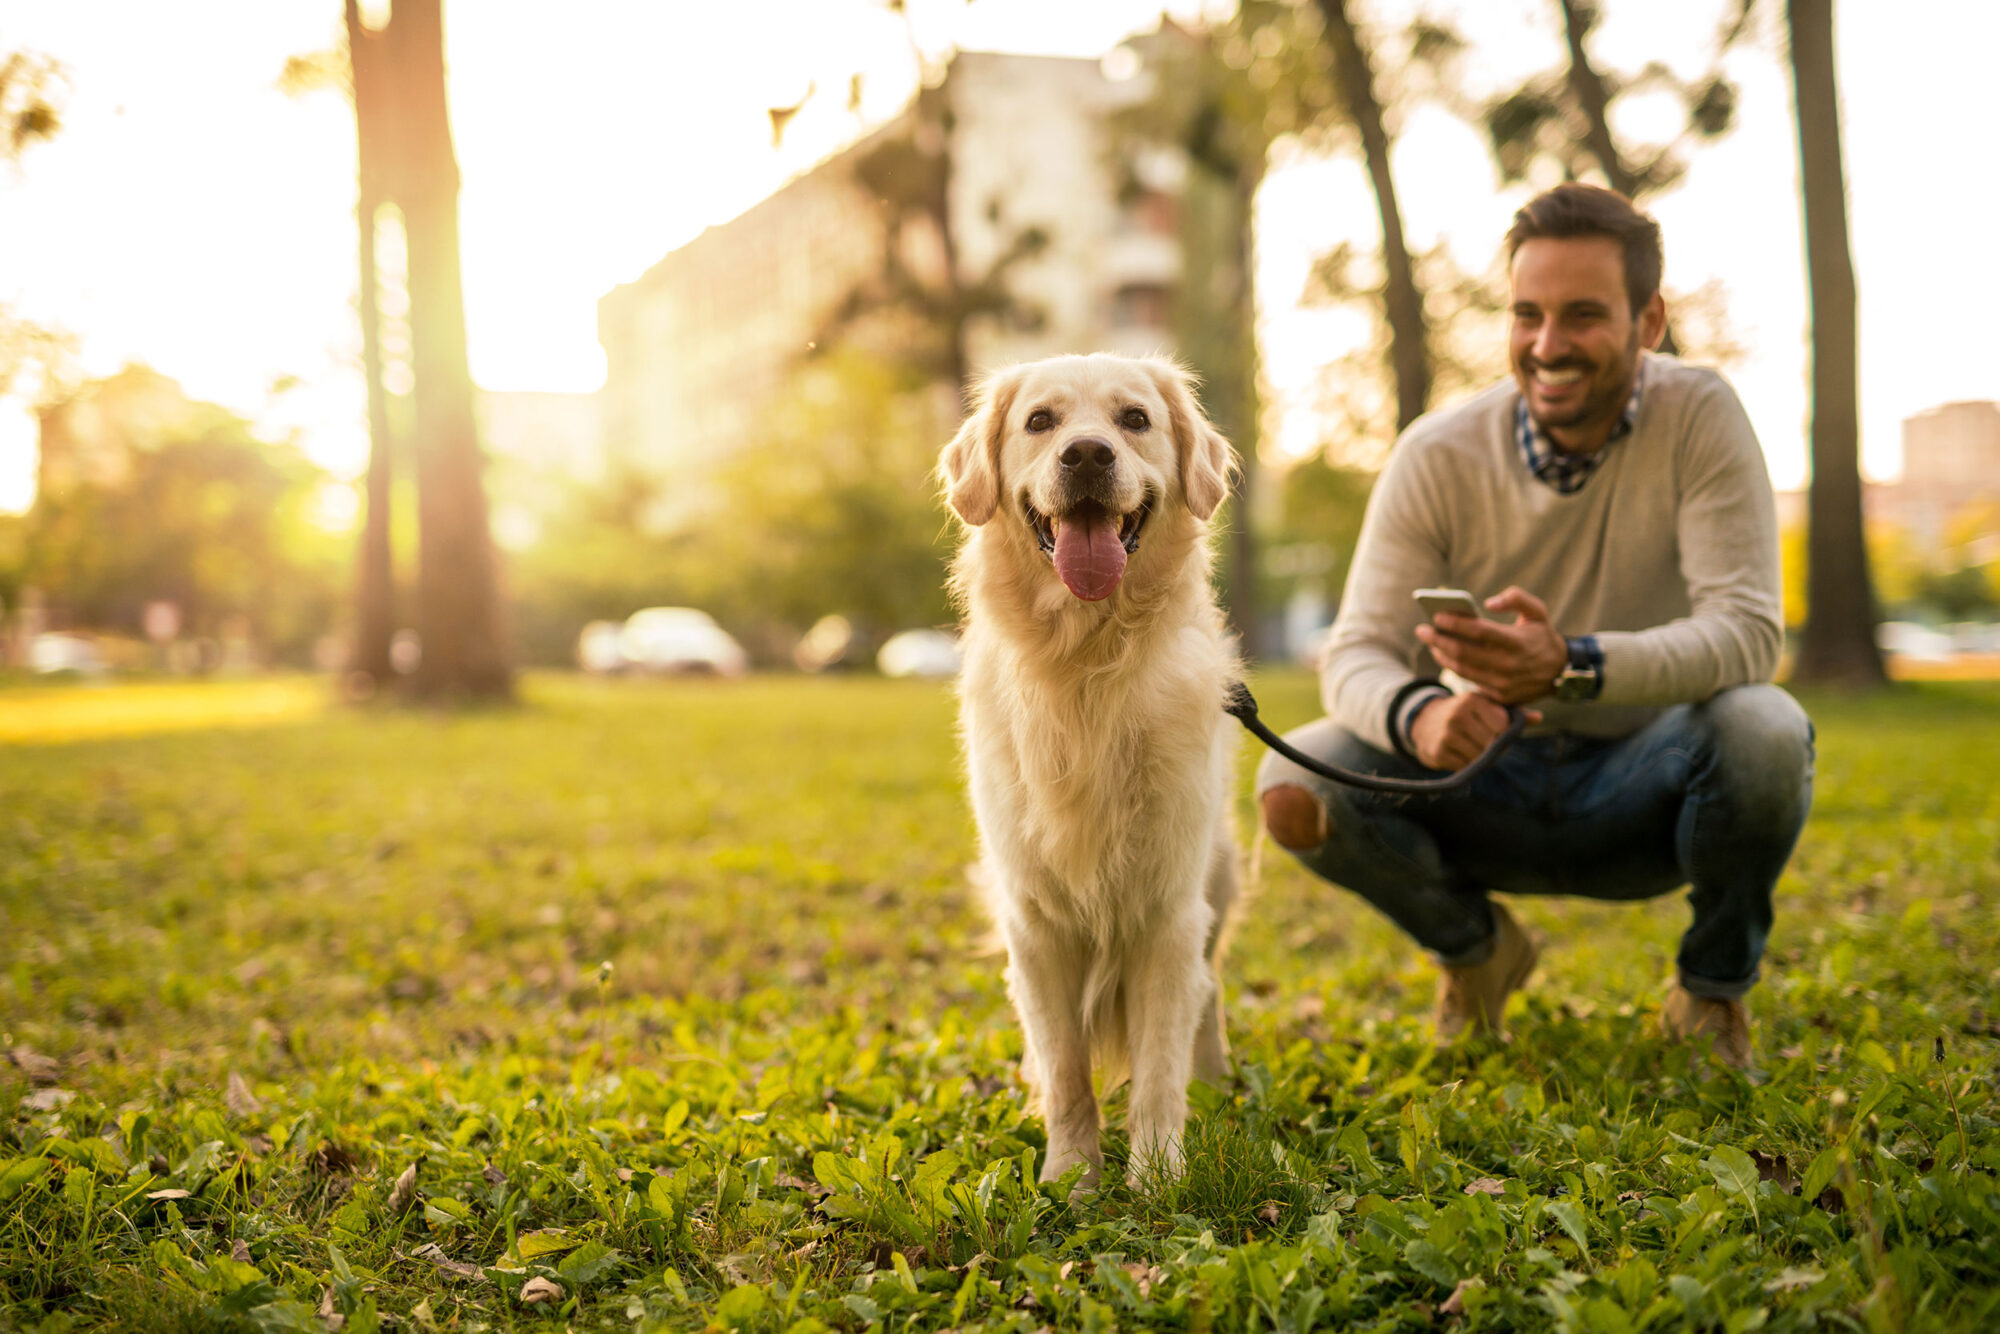 Man with golden retriever at a park in the evening